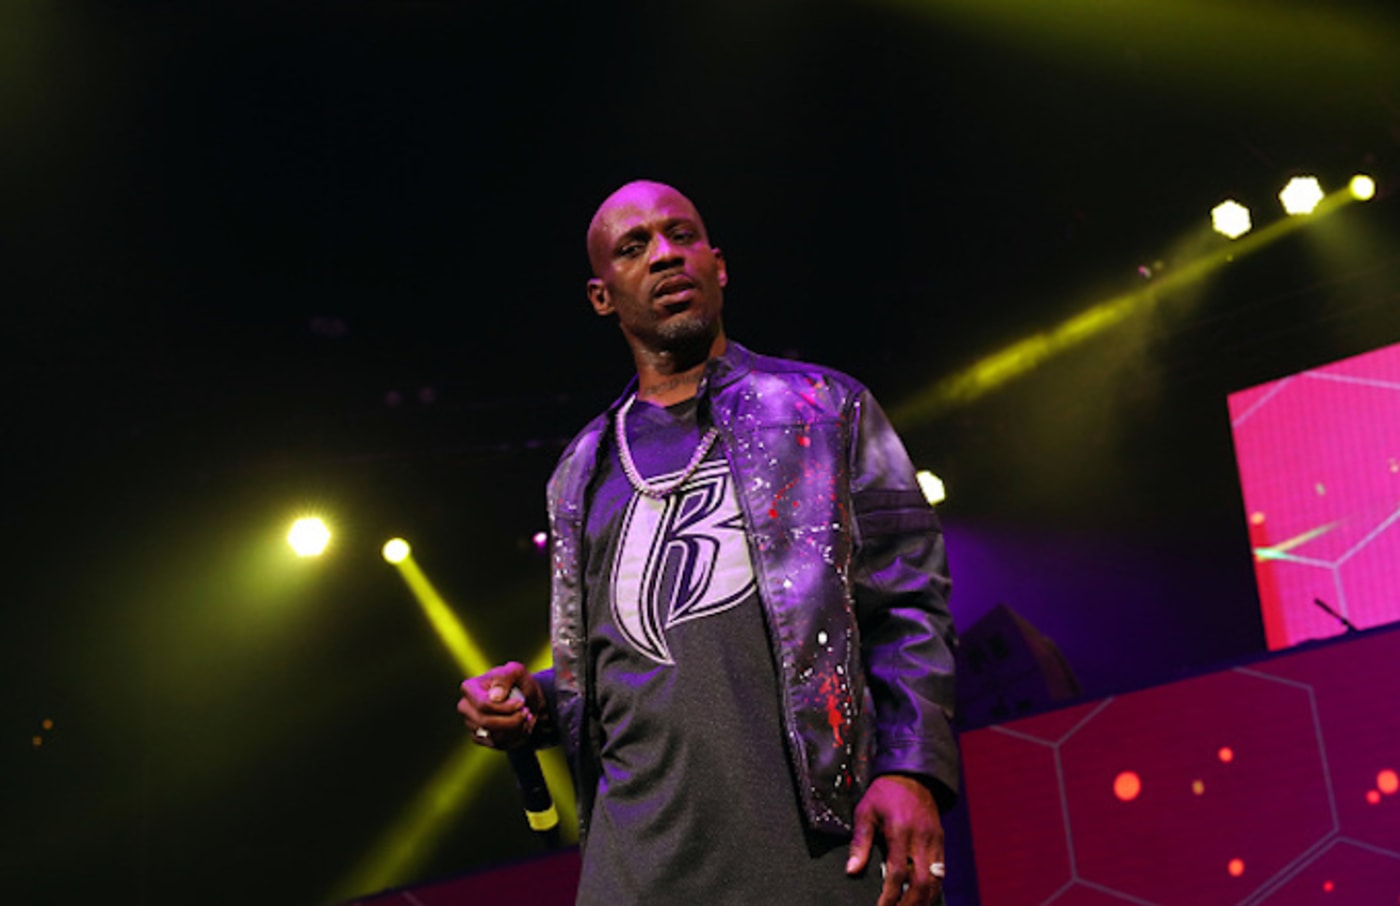 DMX performs during the Ruff Ryders Reunion Concert